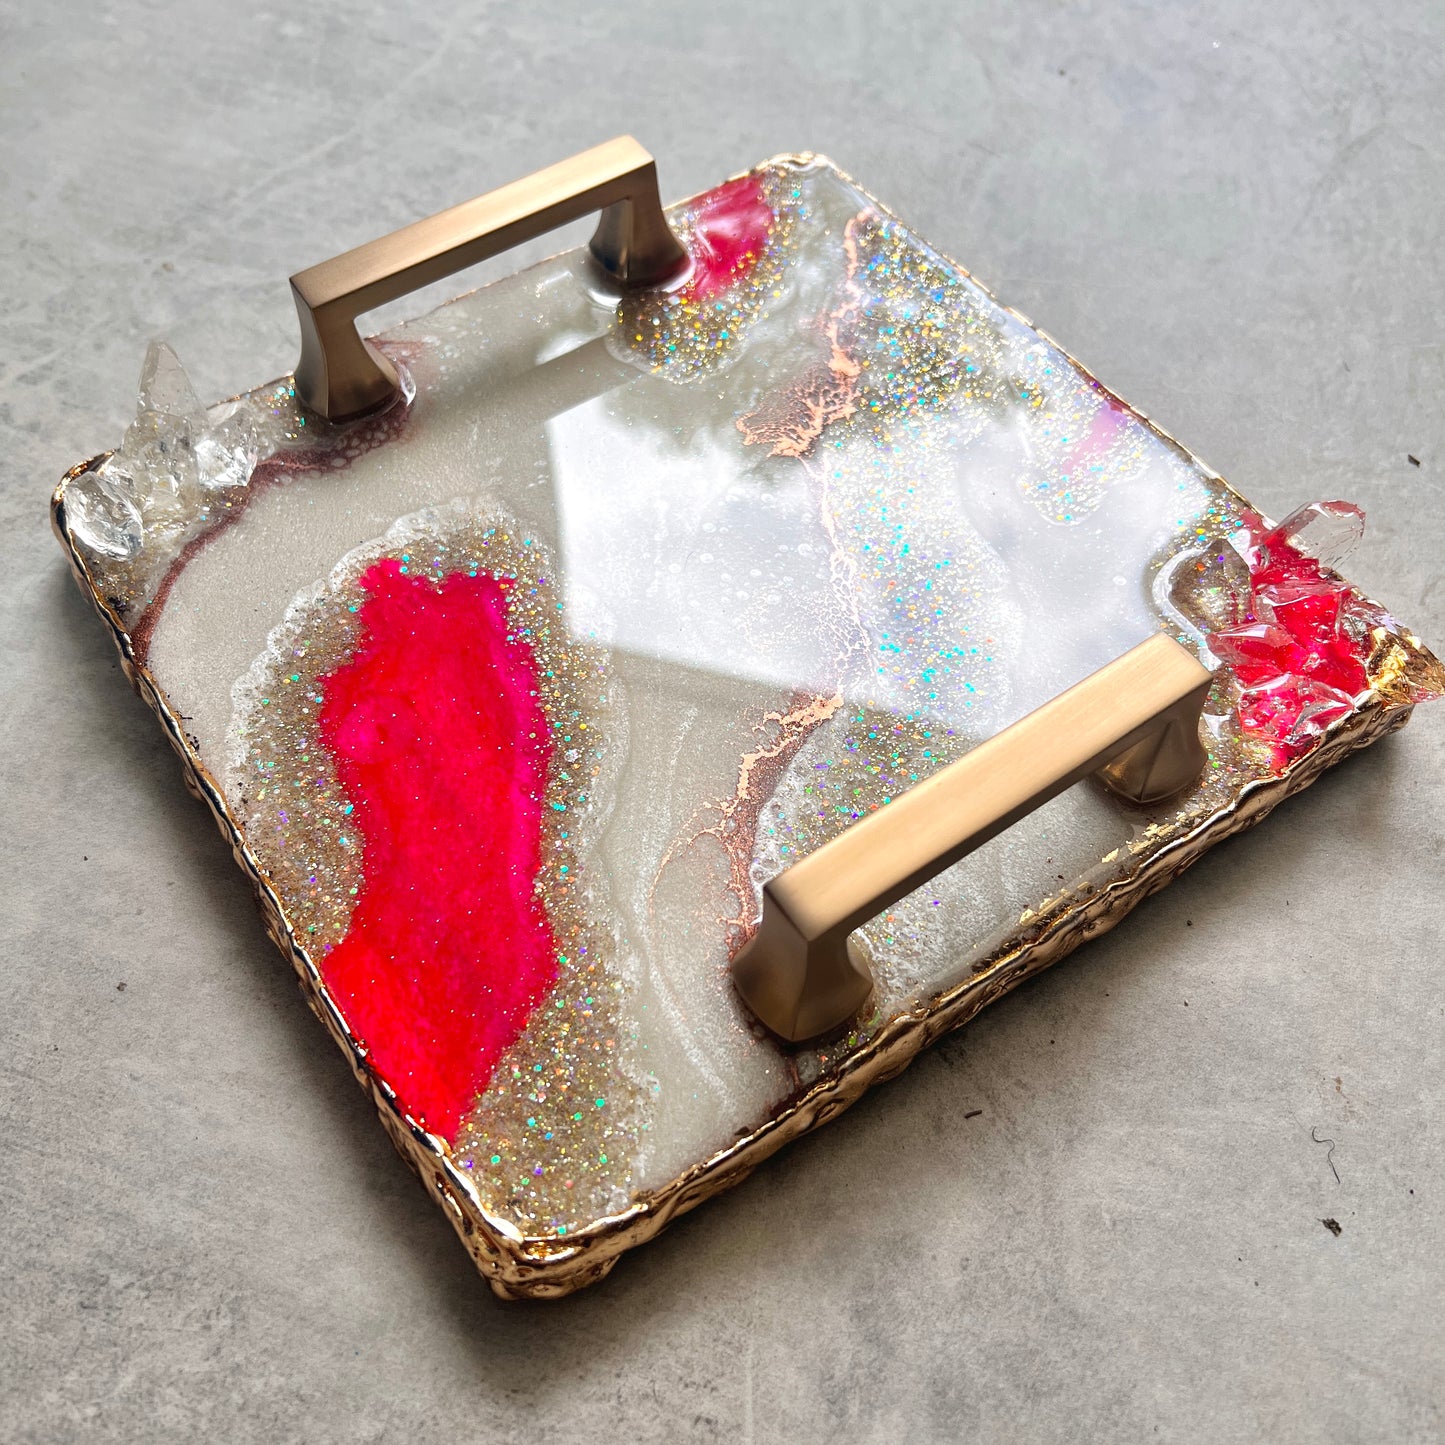 Hot pink and gold mini luxe tray with handles